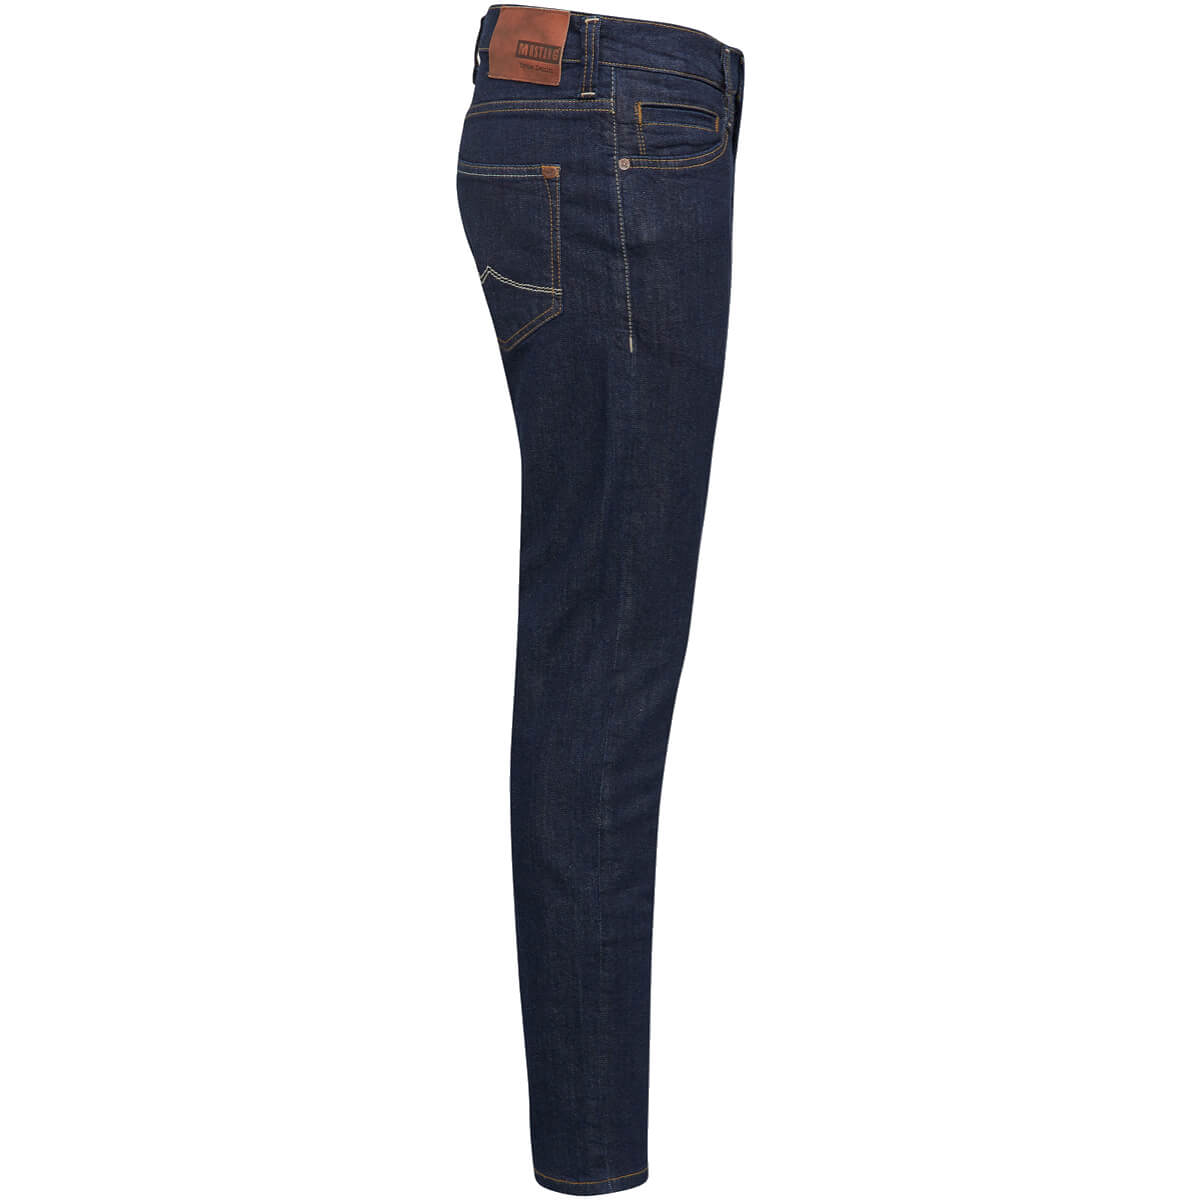 mustang jeans oregon tapered navy 3116 5357 590 crop side